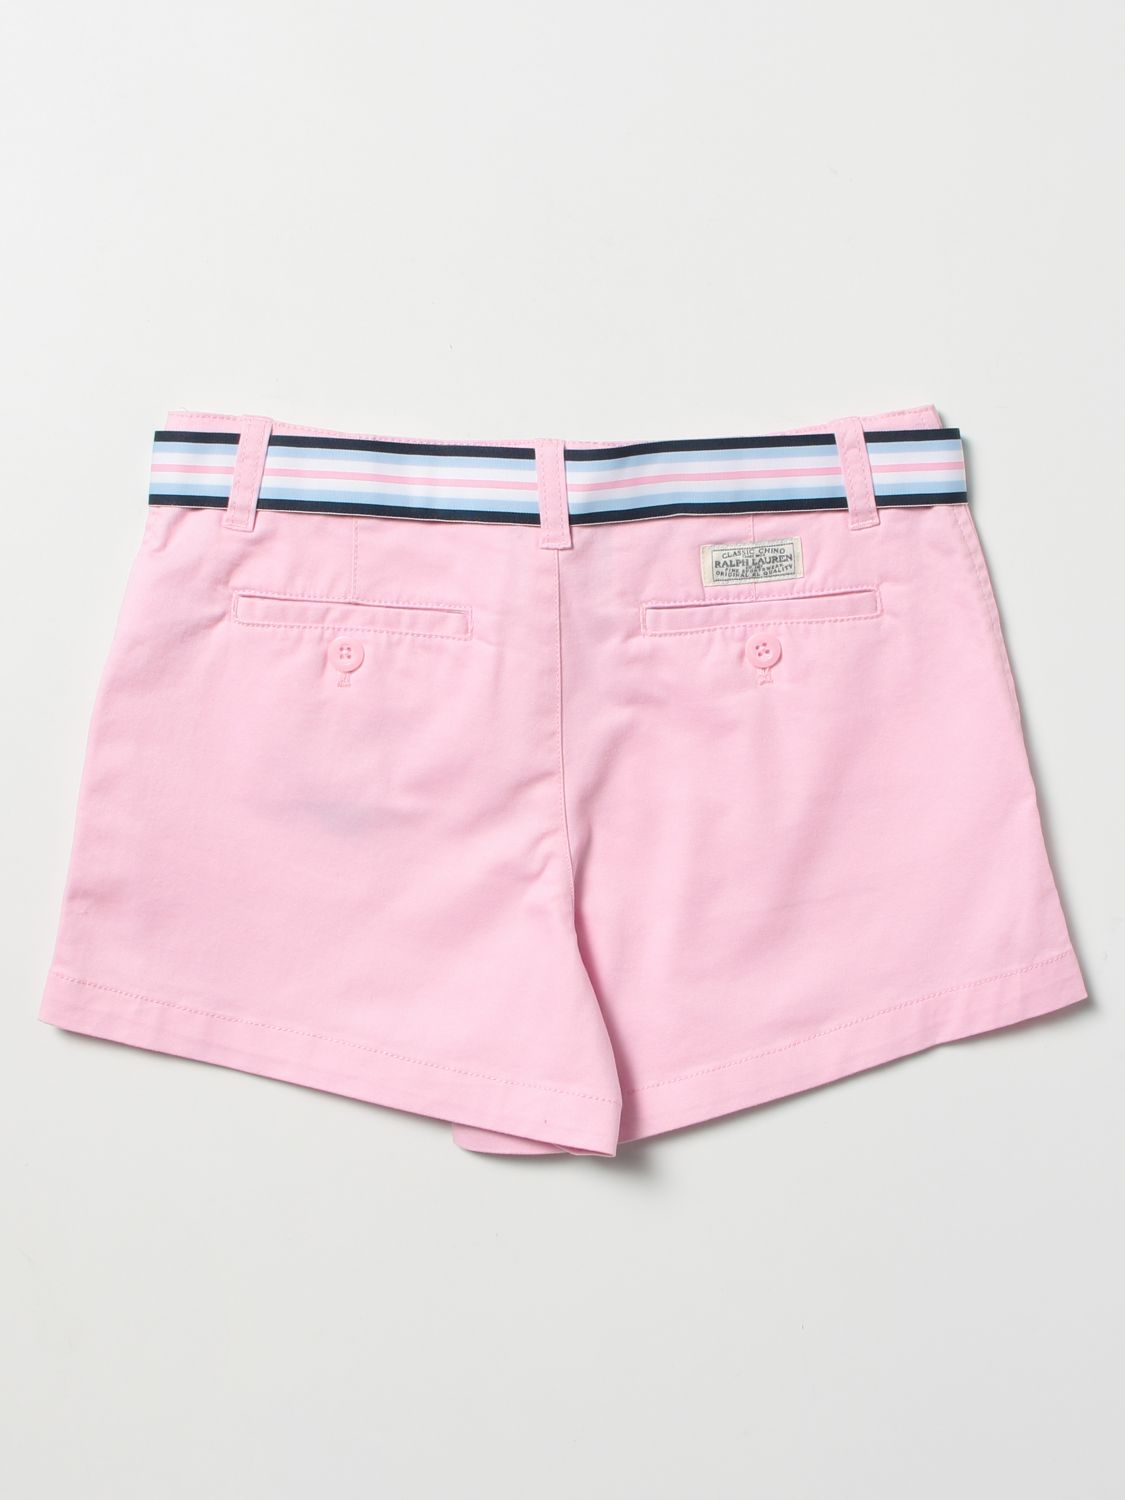 Short Polo Ralph Lauren: Polo Ralph Lauren short for girls pink 2